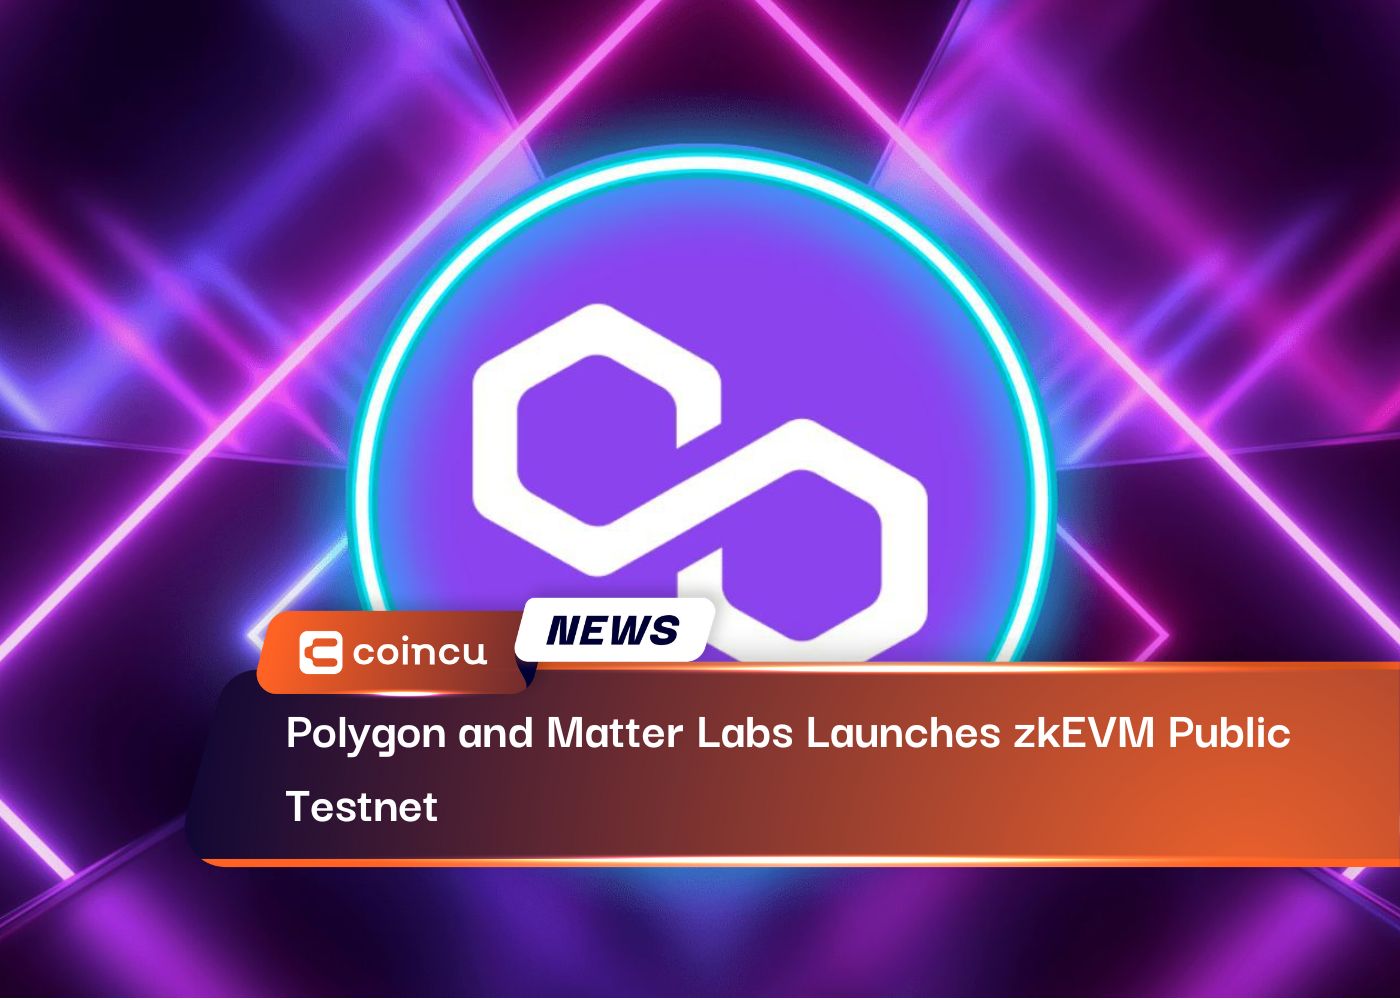 Polygon and Matter Labs Launches zkEVM Public Testnet